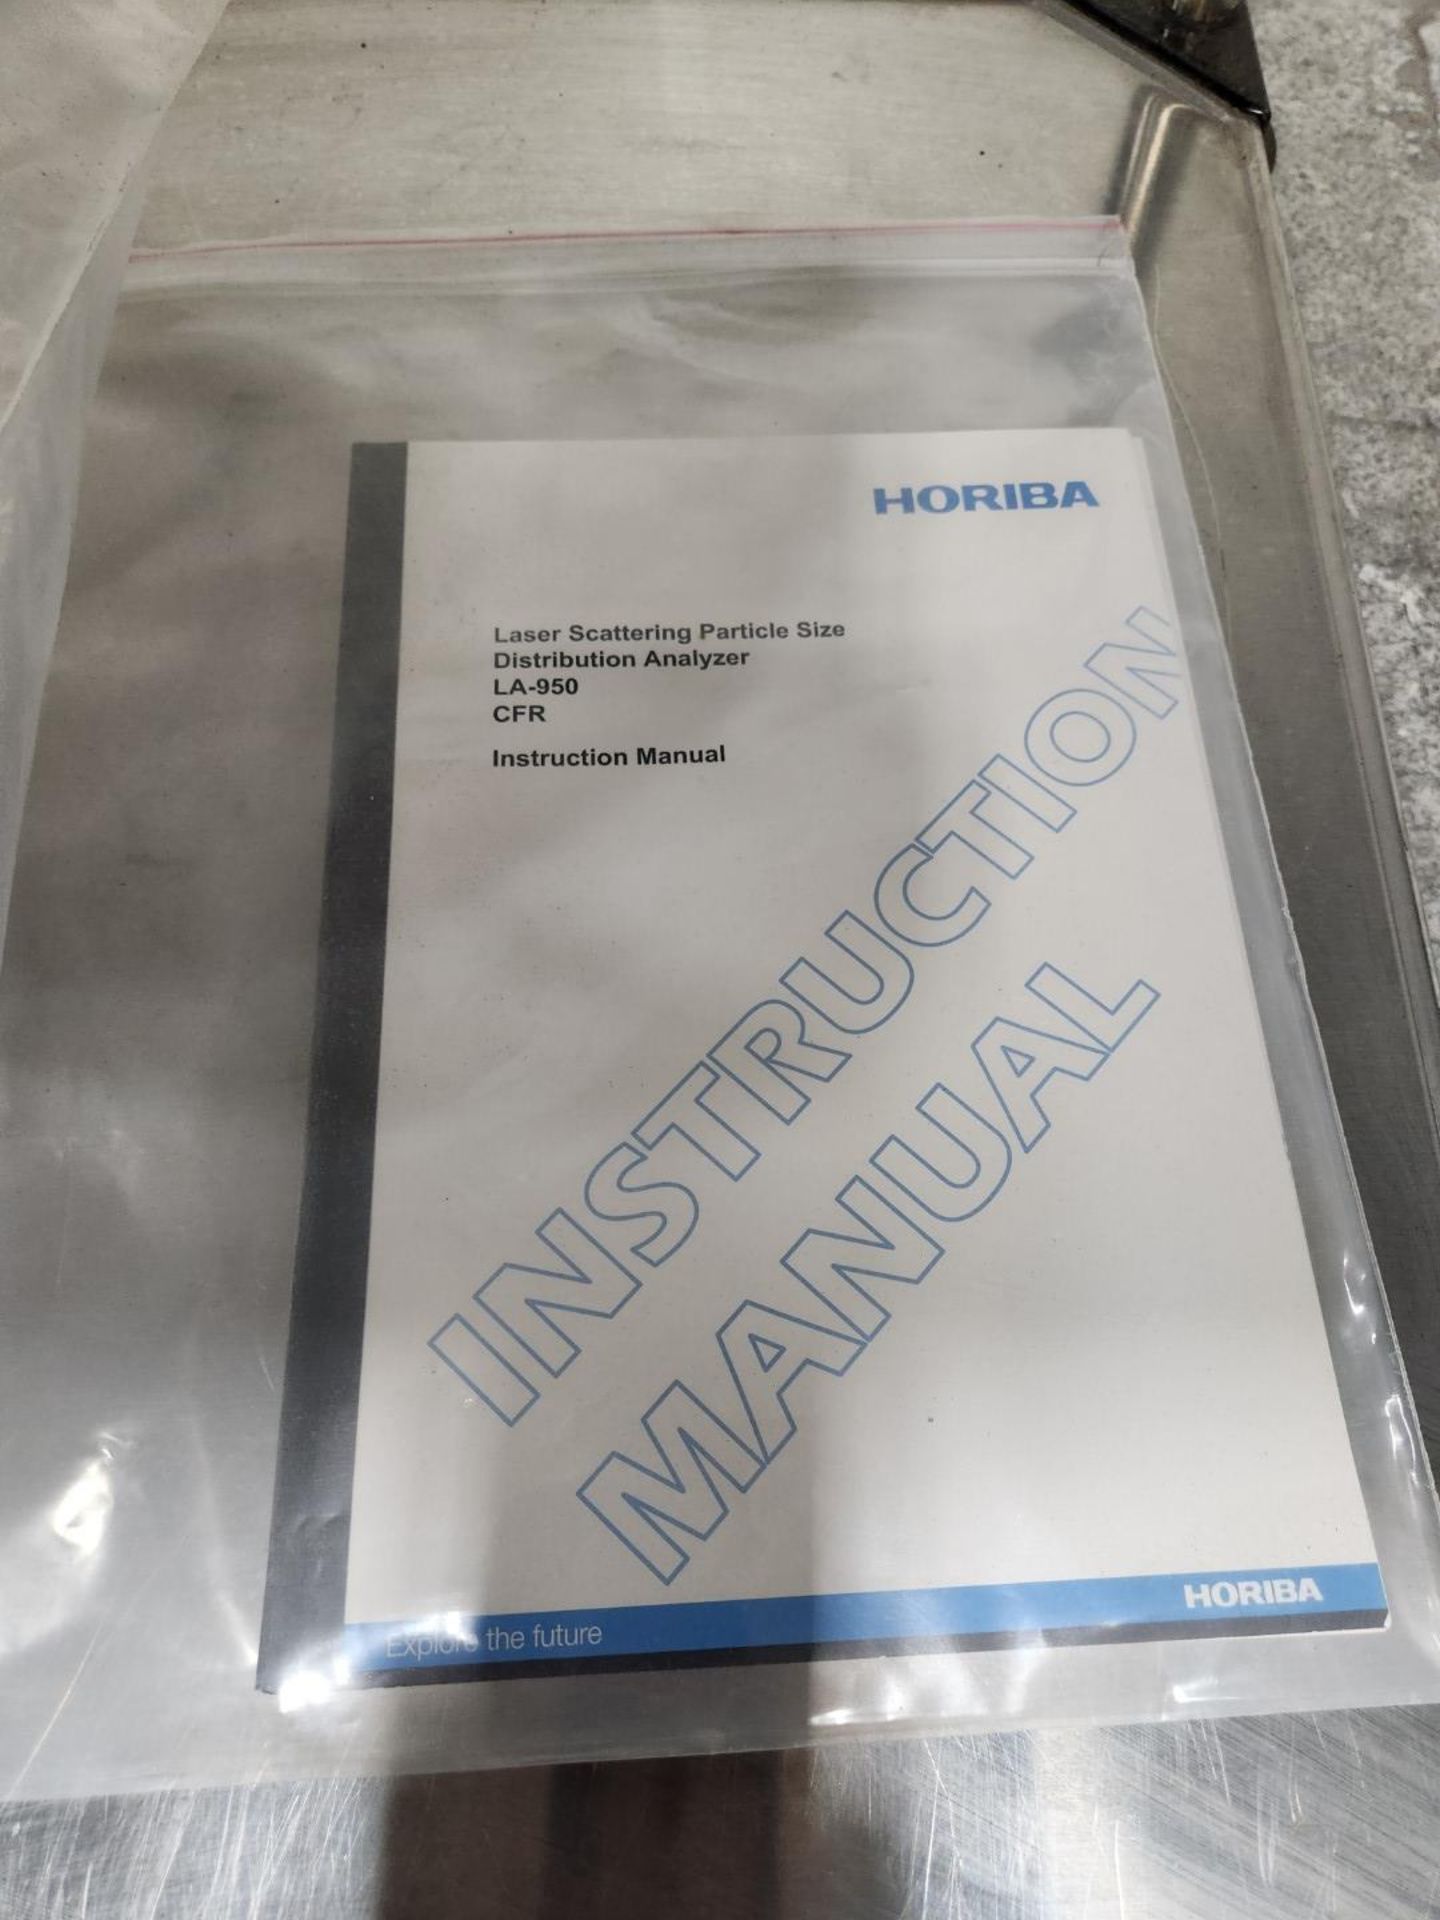 Horiba Partica Model LA-950 Laser Scattering Particle Size Distribution Analyzer, with manual and - Image 10 of 13